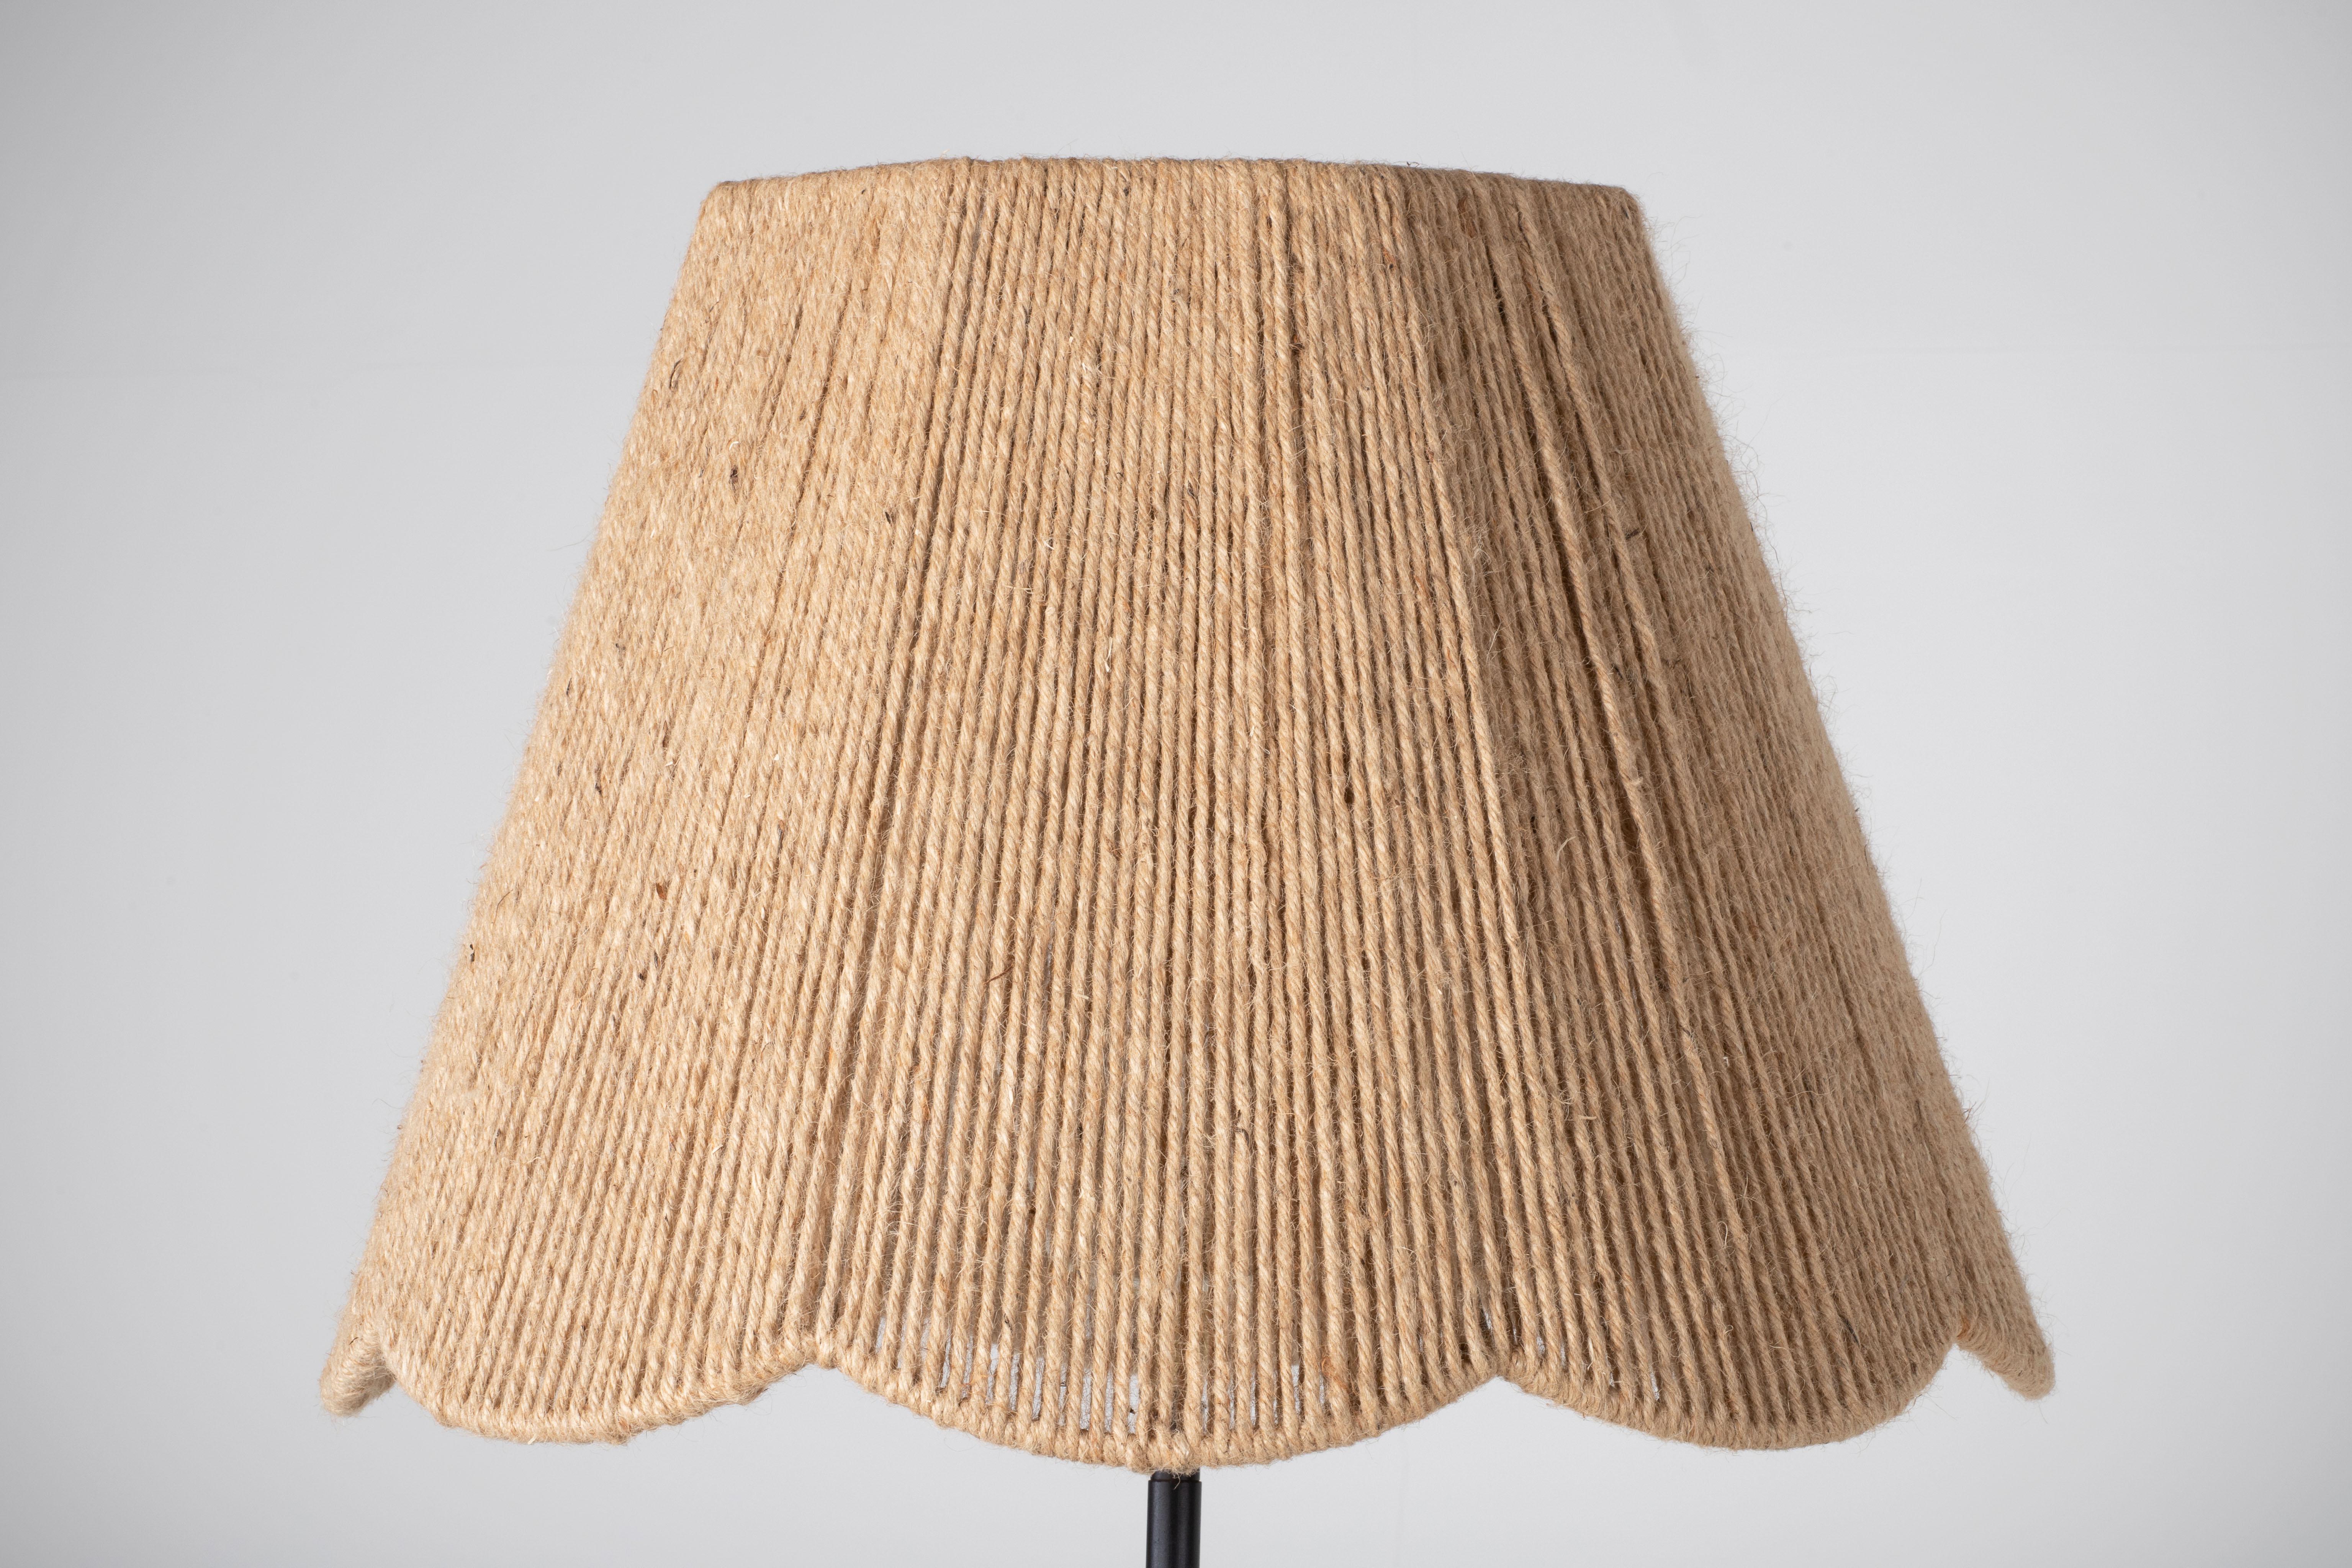 Rattan Mid-Century Rope and Wrought iron Floor Lamp, France, 1950 For Sale